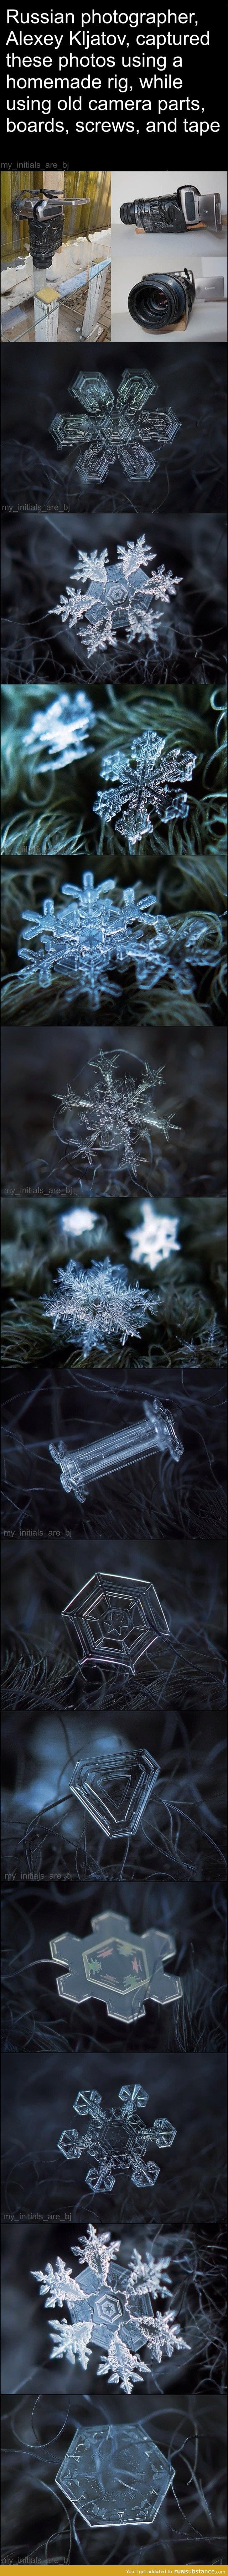 Epic close up photos of snowflakes